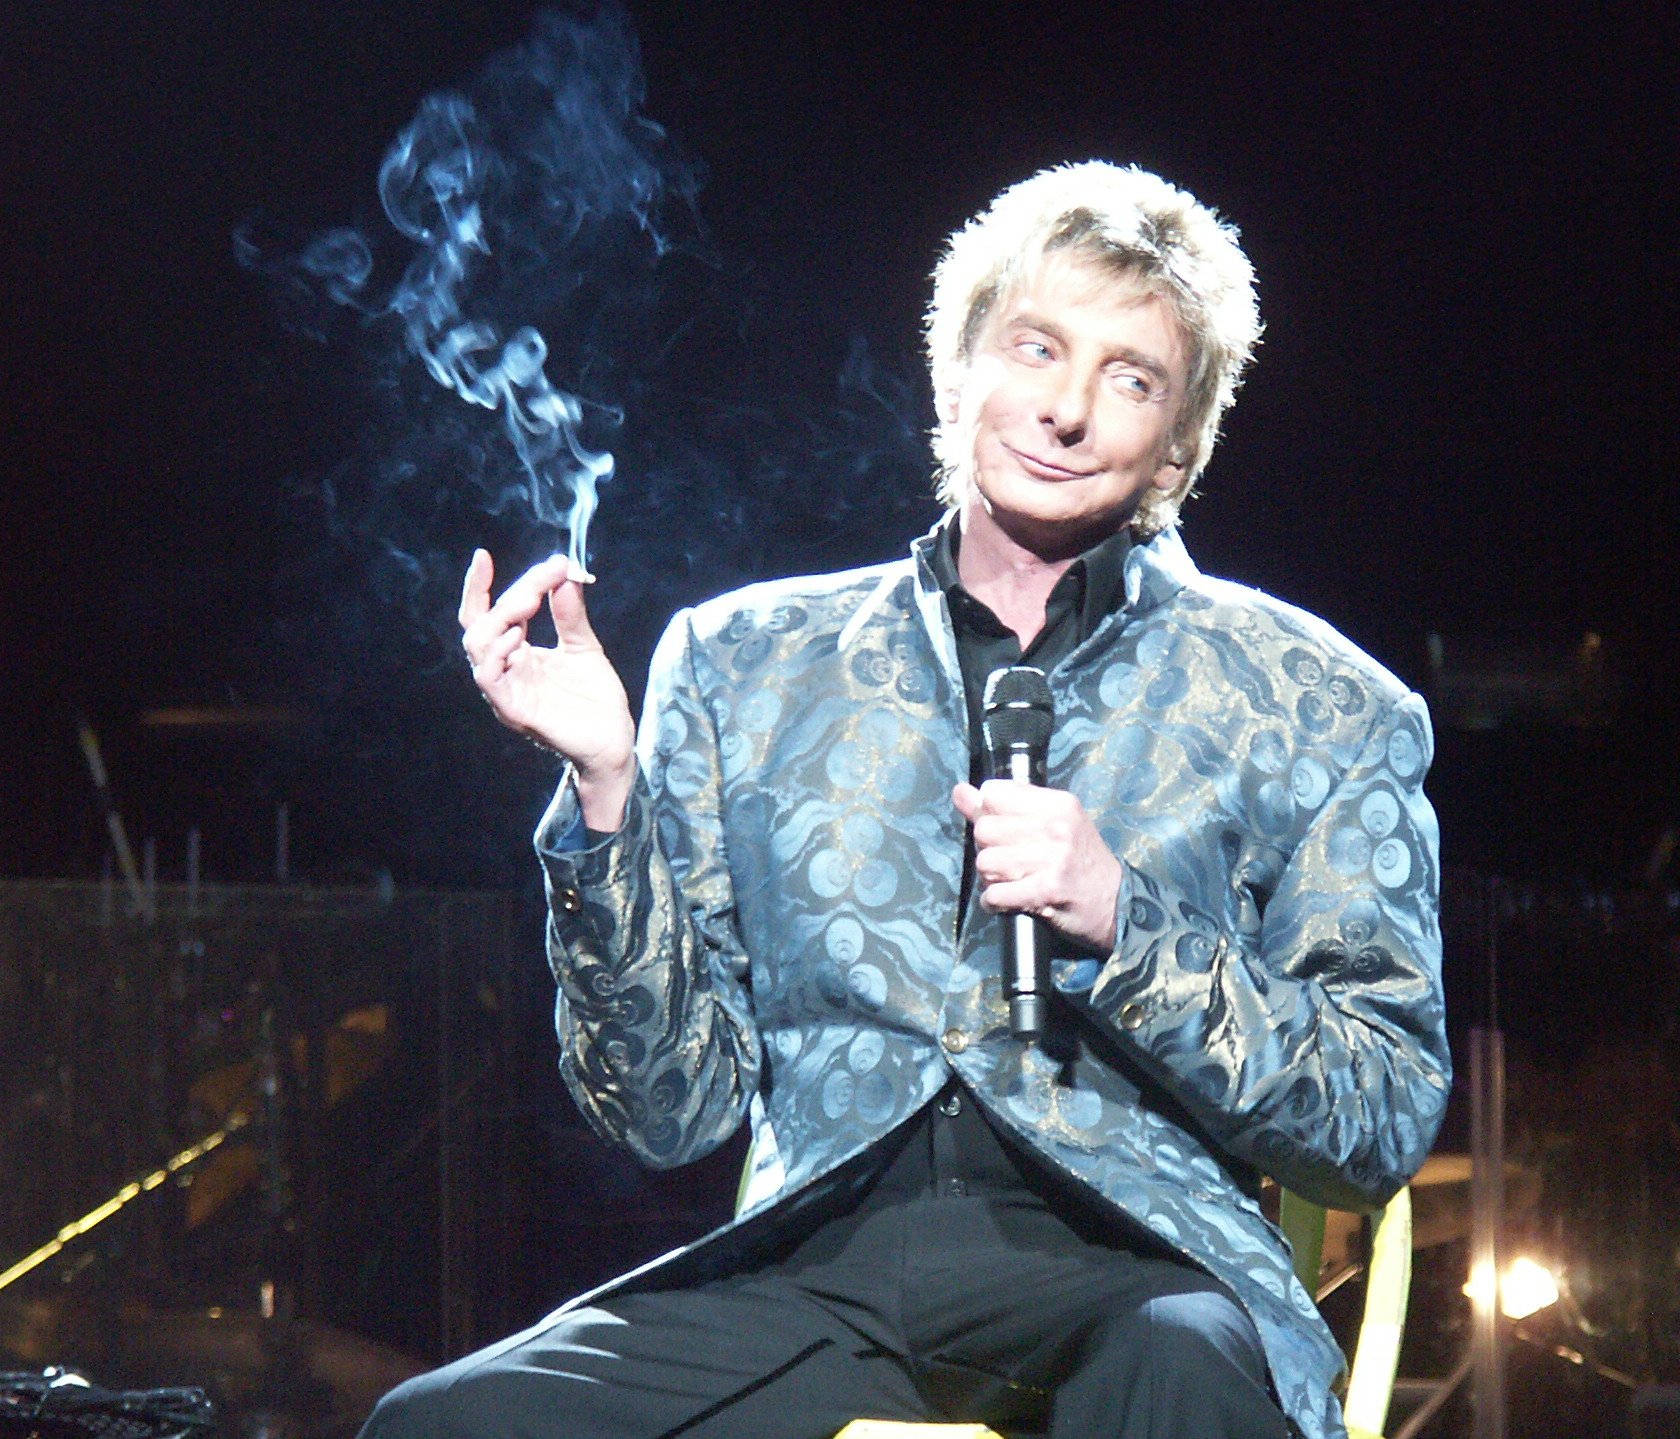 Happy Birthday to Barry Manilow who turns 74 today! 